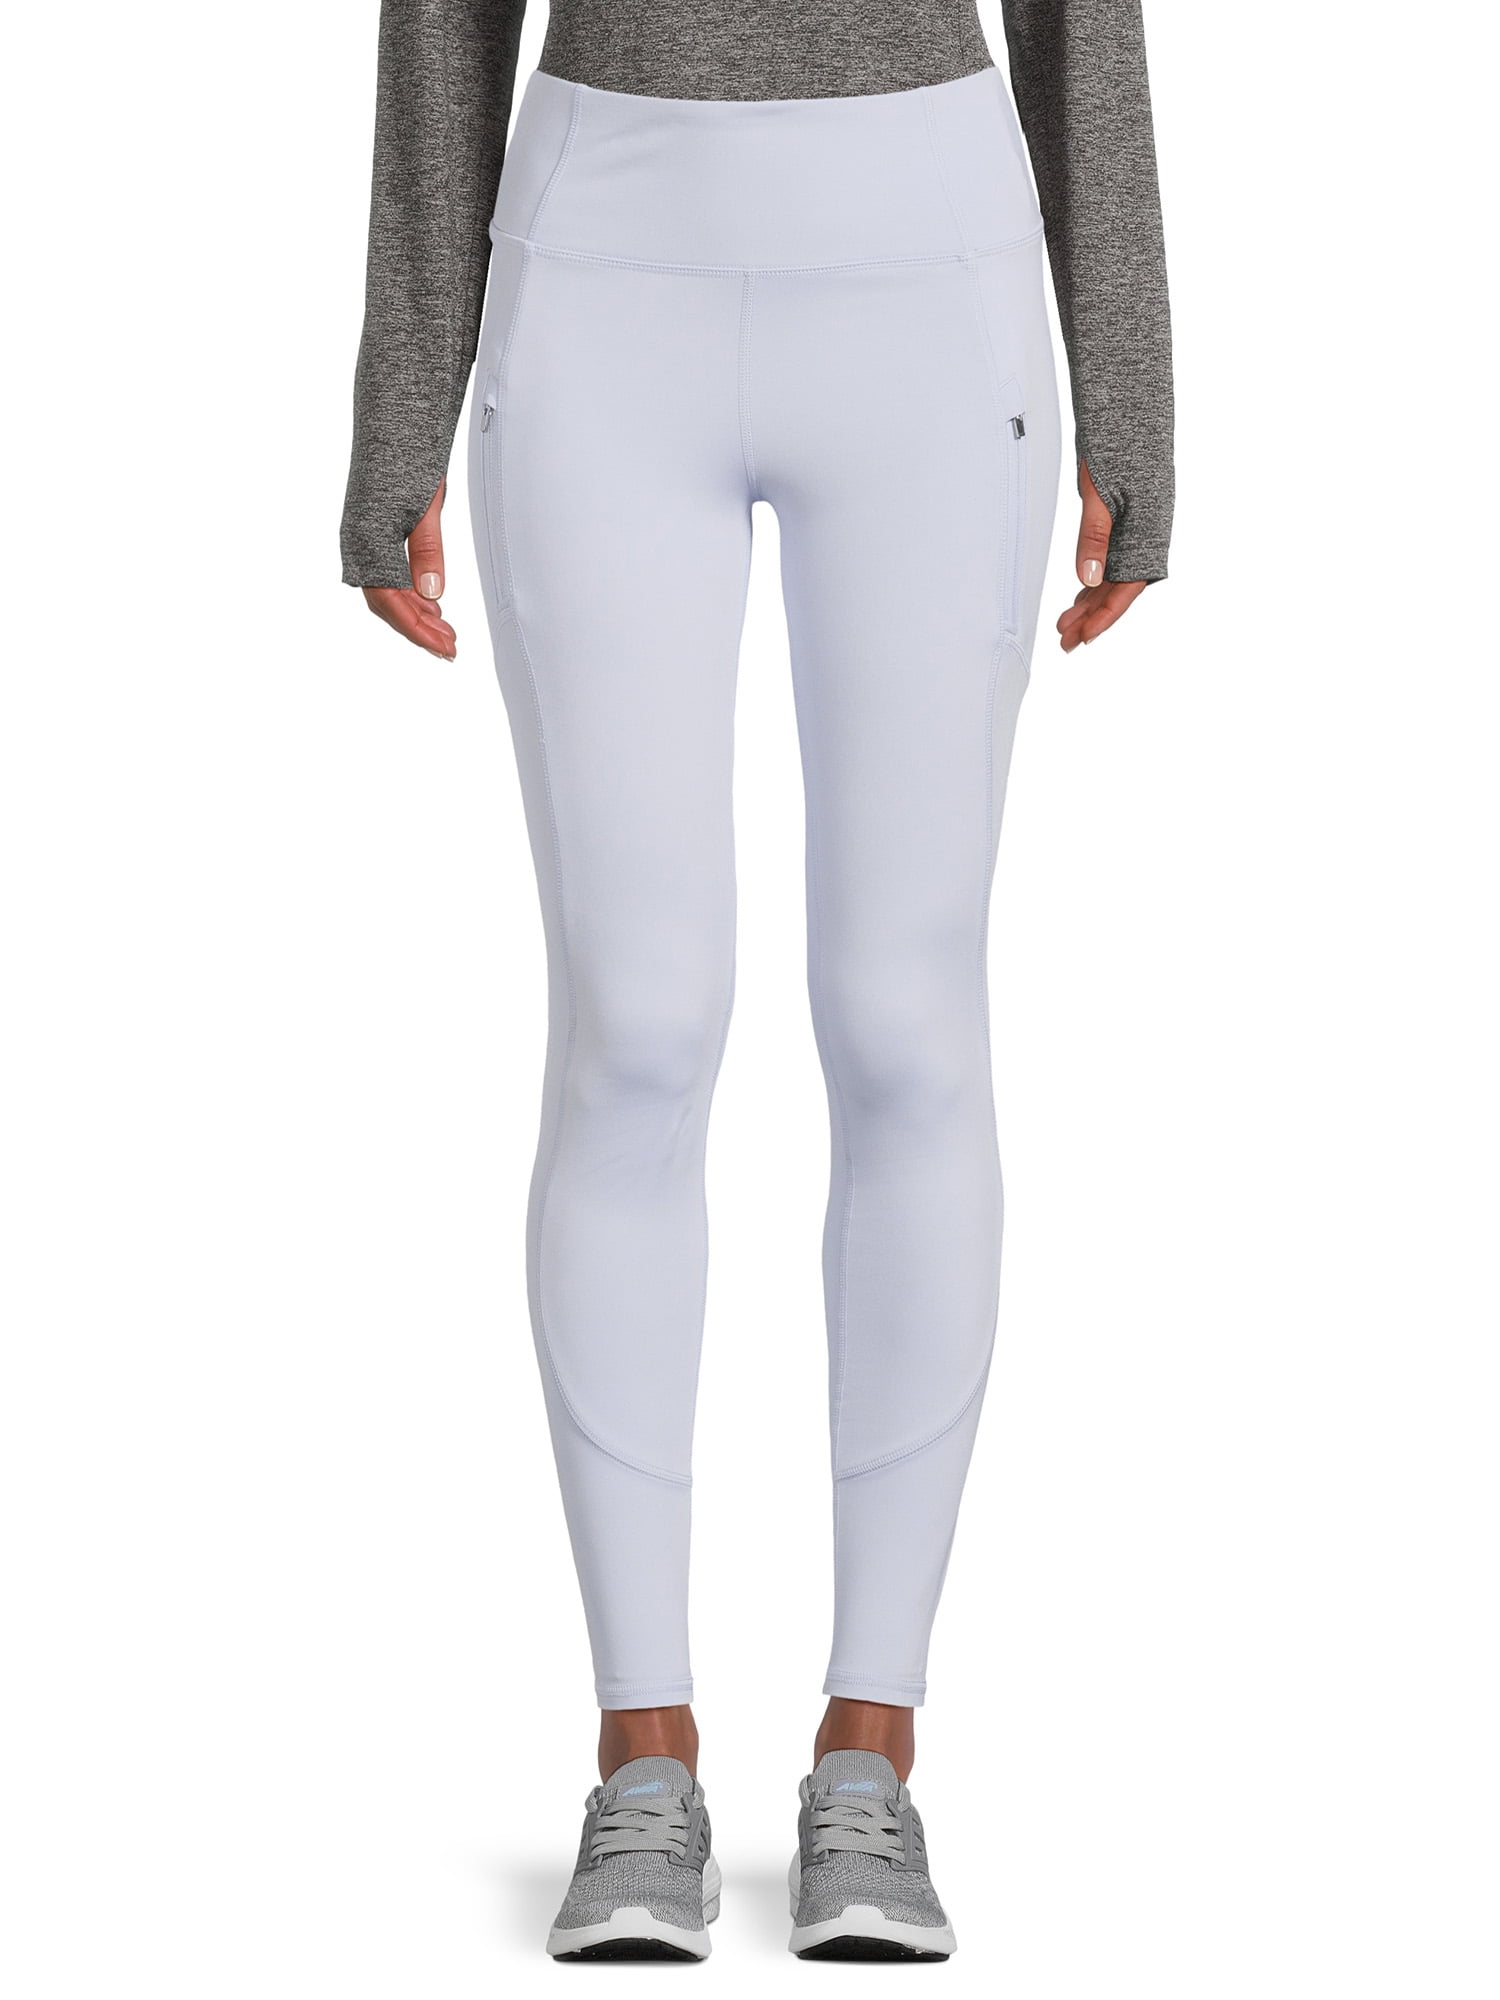 Avia Pocket Leggings Blue Size L - $8 (46% Off Retail) - From Christal